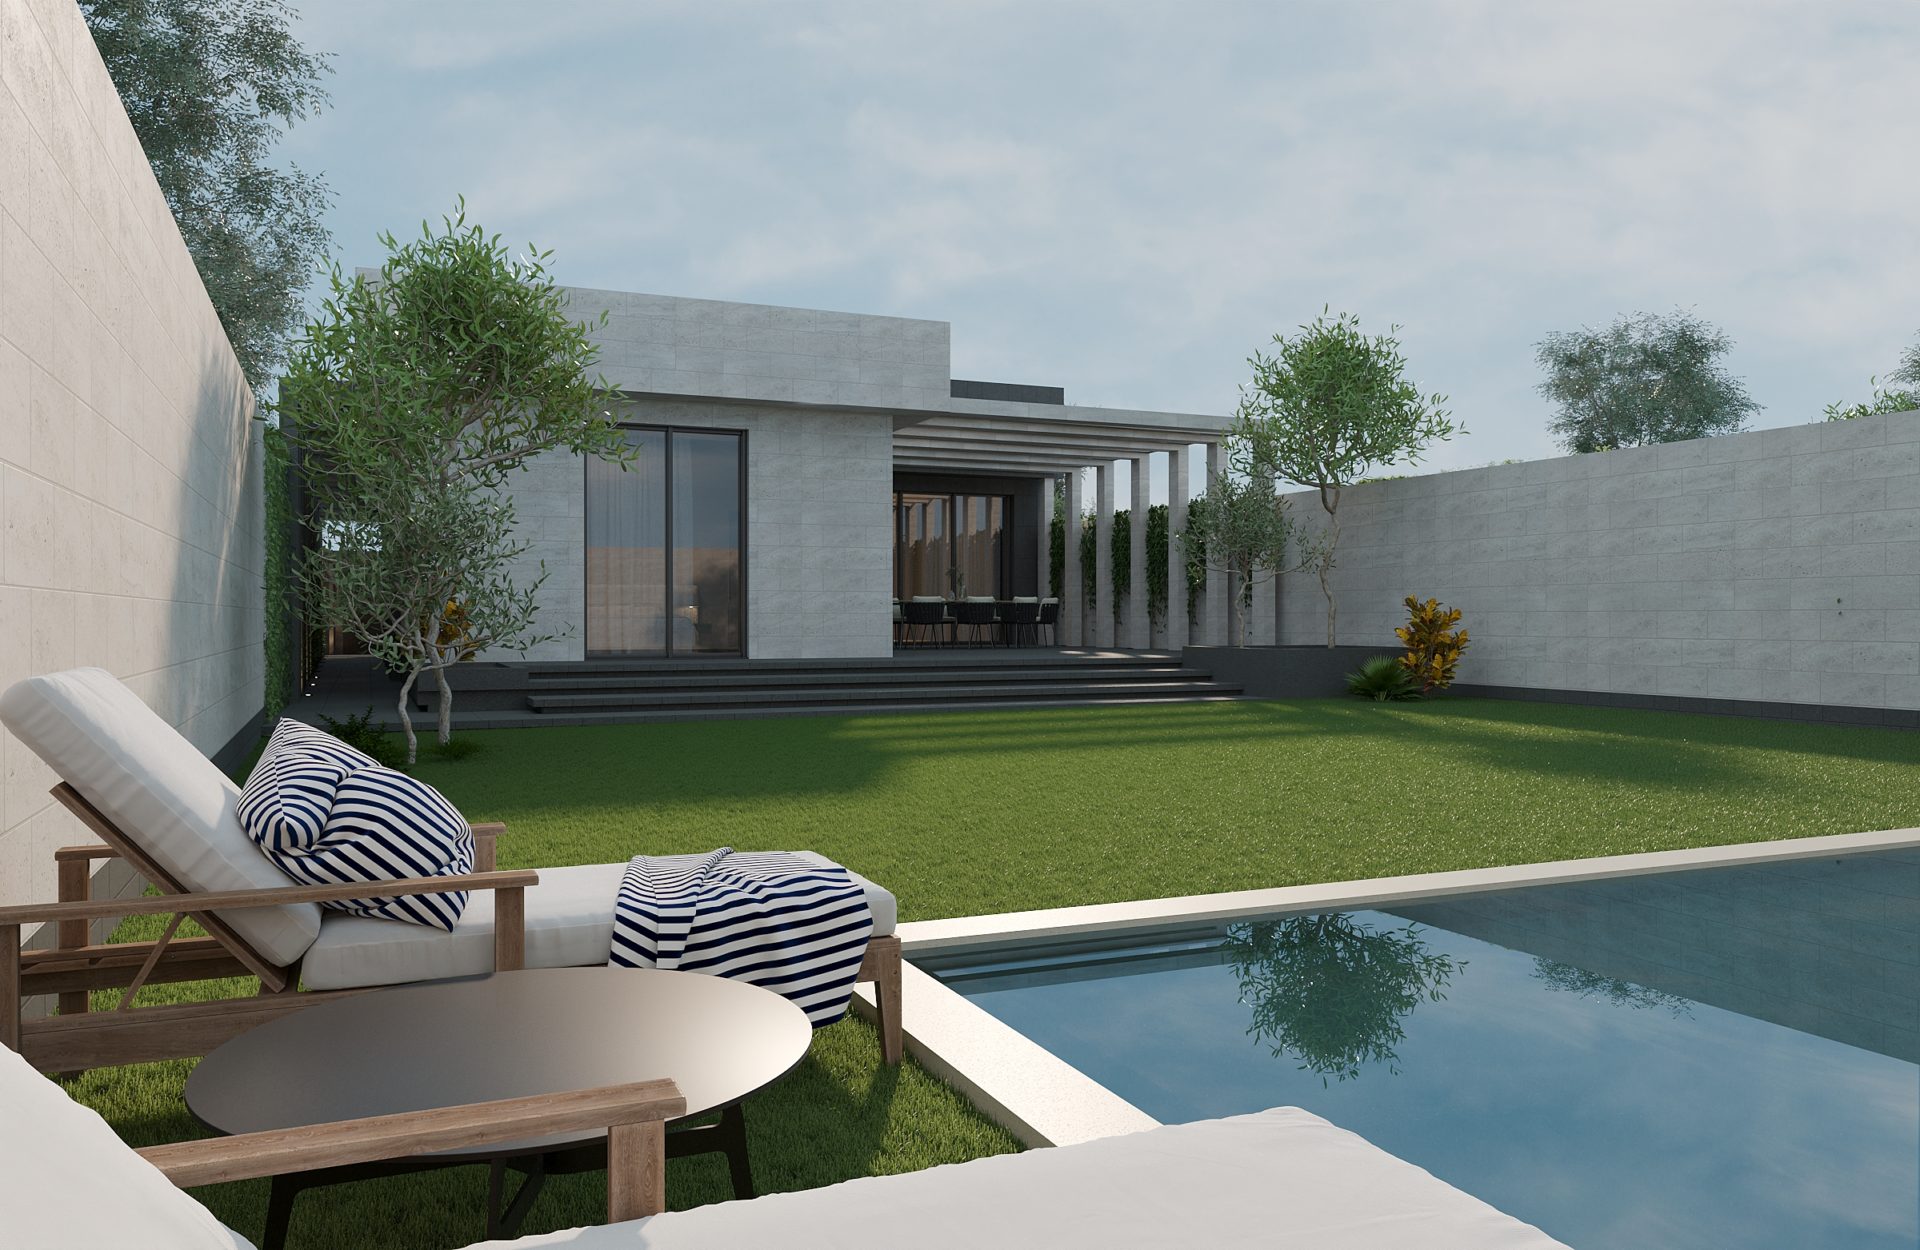 3D image of a one-story mansion with a lawn and access to the pool and sun loungers